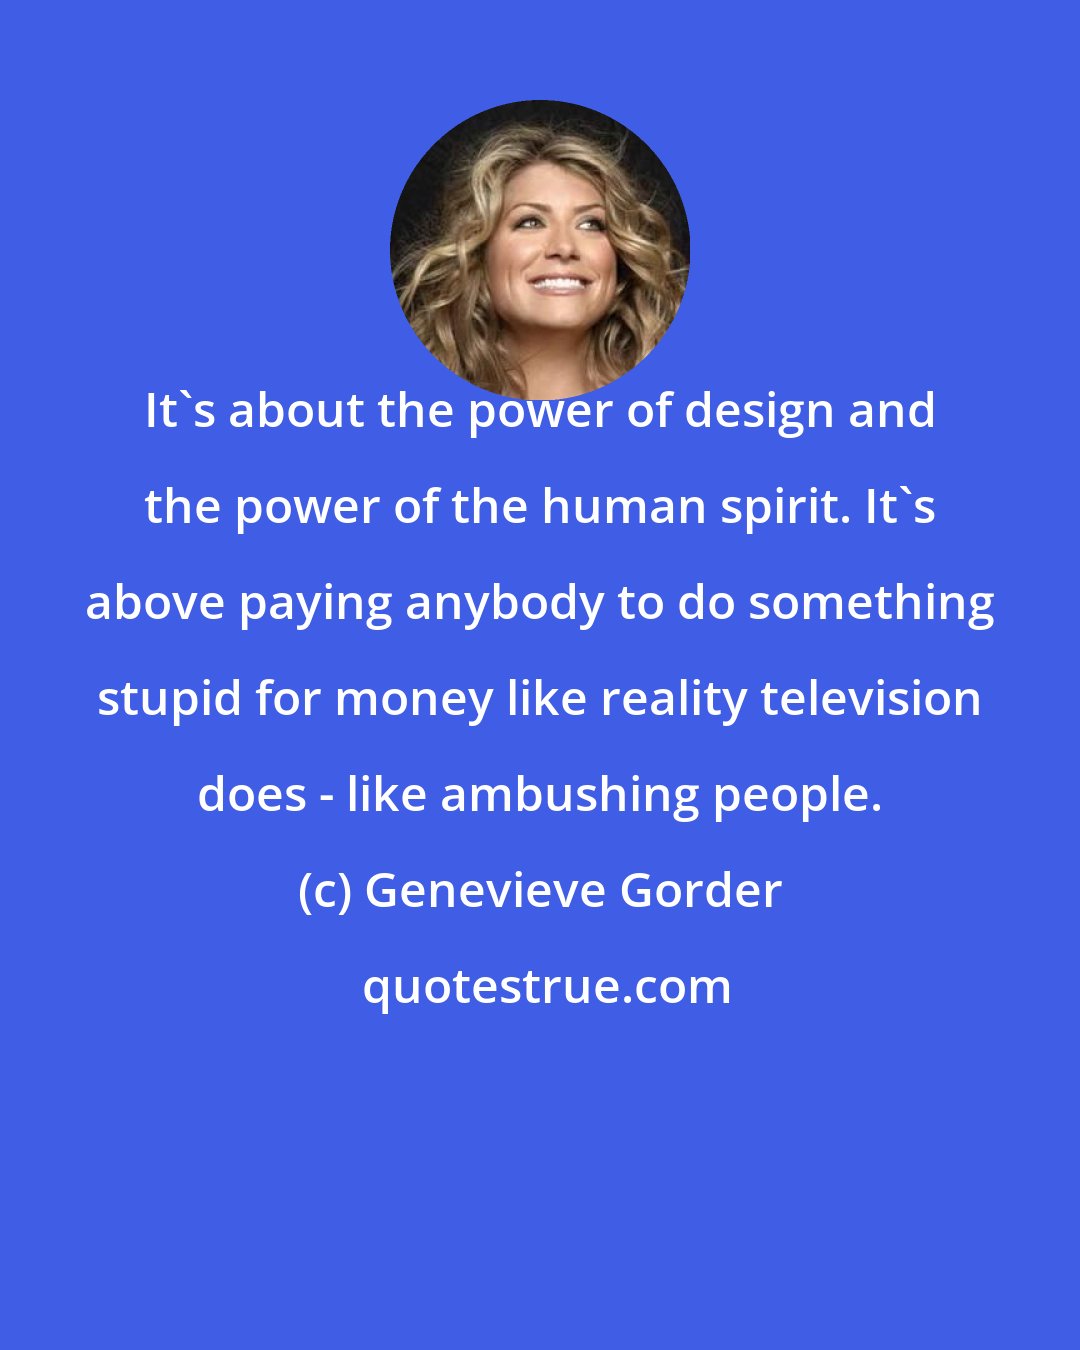 Genevieve Gorder: It's about the power of design and the power of the human spirit. It's above paying anybody to do something stupid for money like reality television does - like ambushing people.